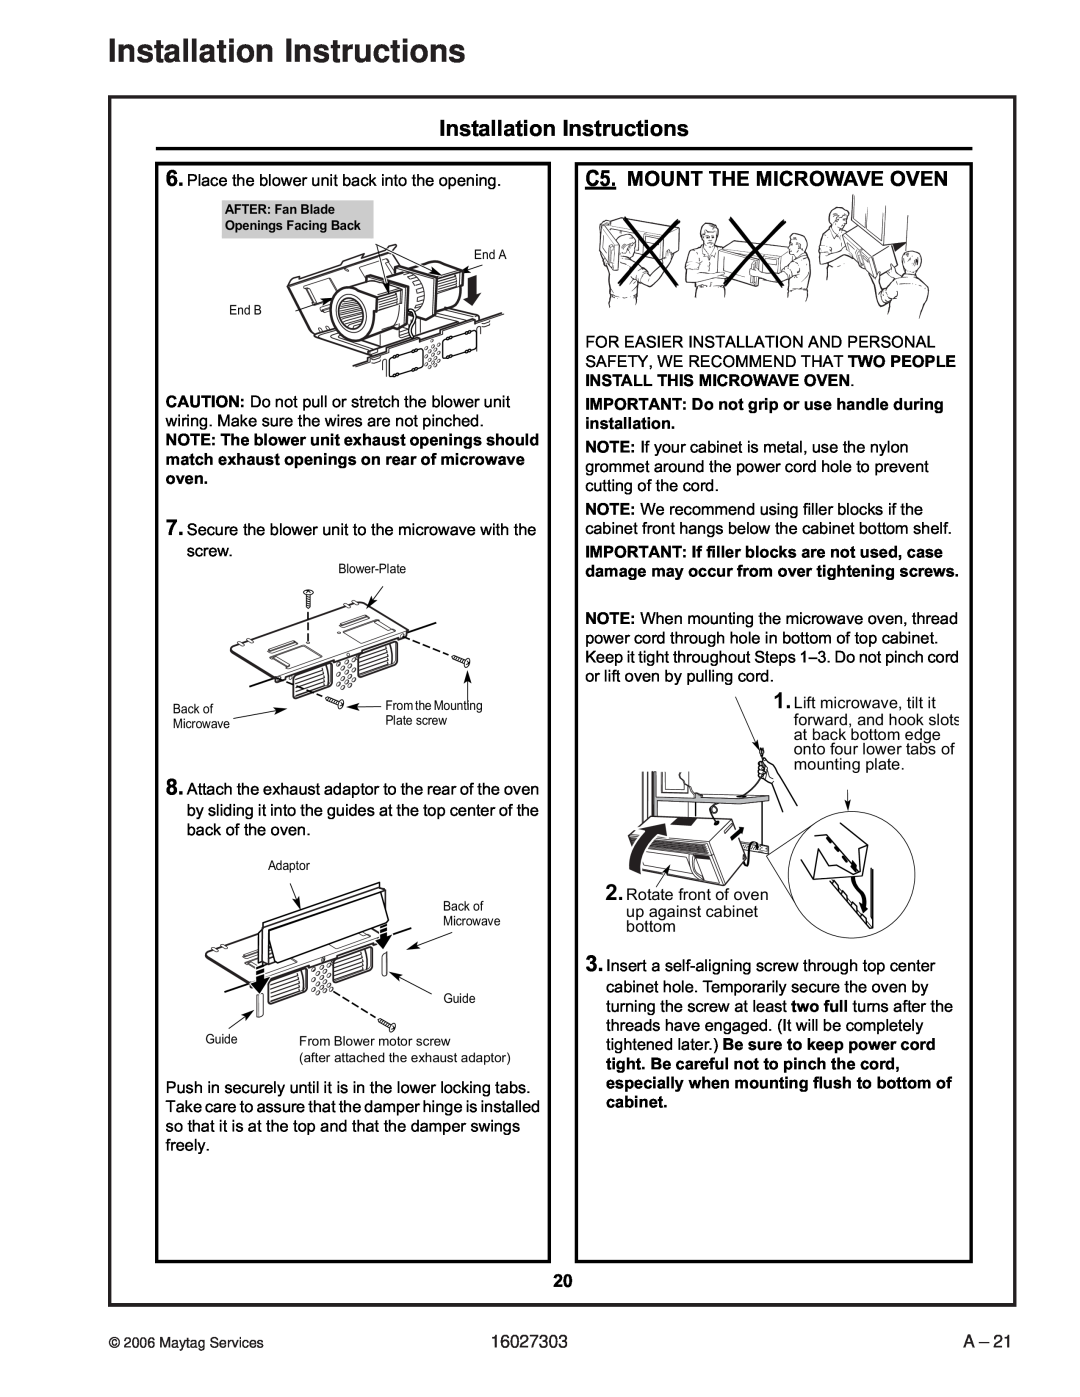 Maytag UMV1152CA manual C5.MOUNT THE MICROWAVE OVEN, Installation Instructions 